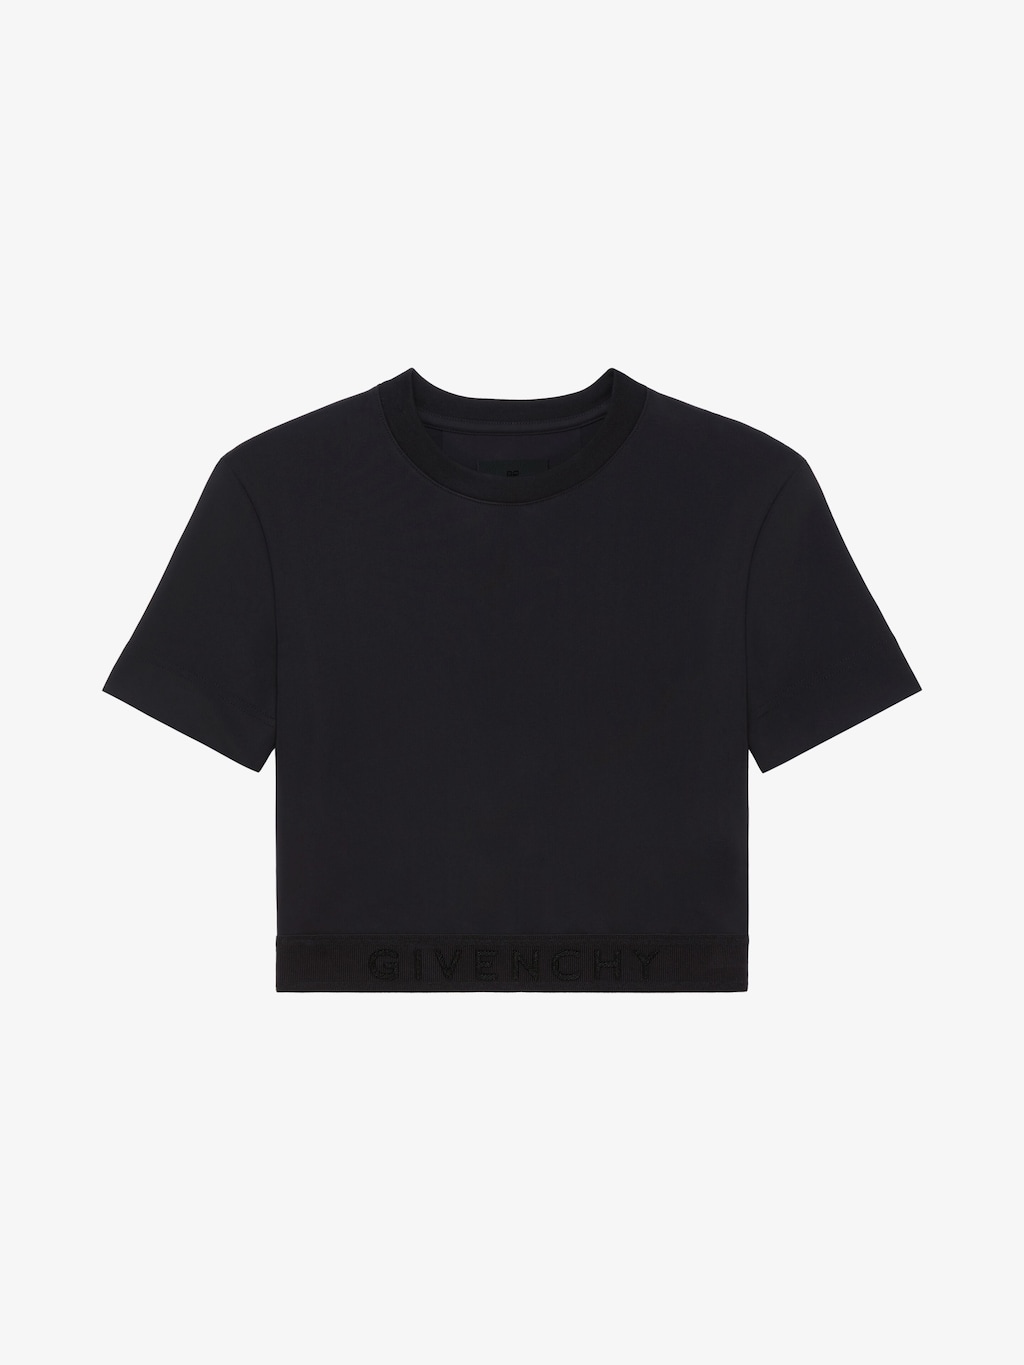 Women's Designer Shirts & Tops: Luxury Silk & Cotton Tops | Givenchy US